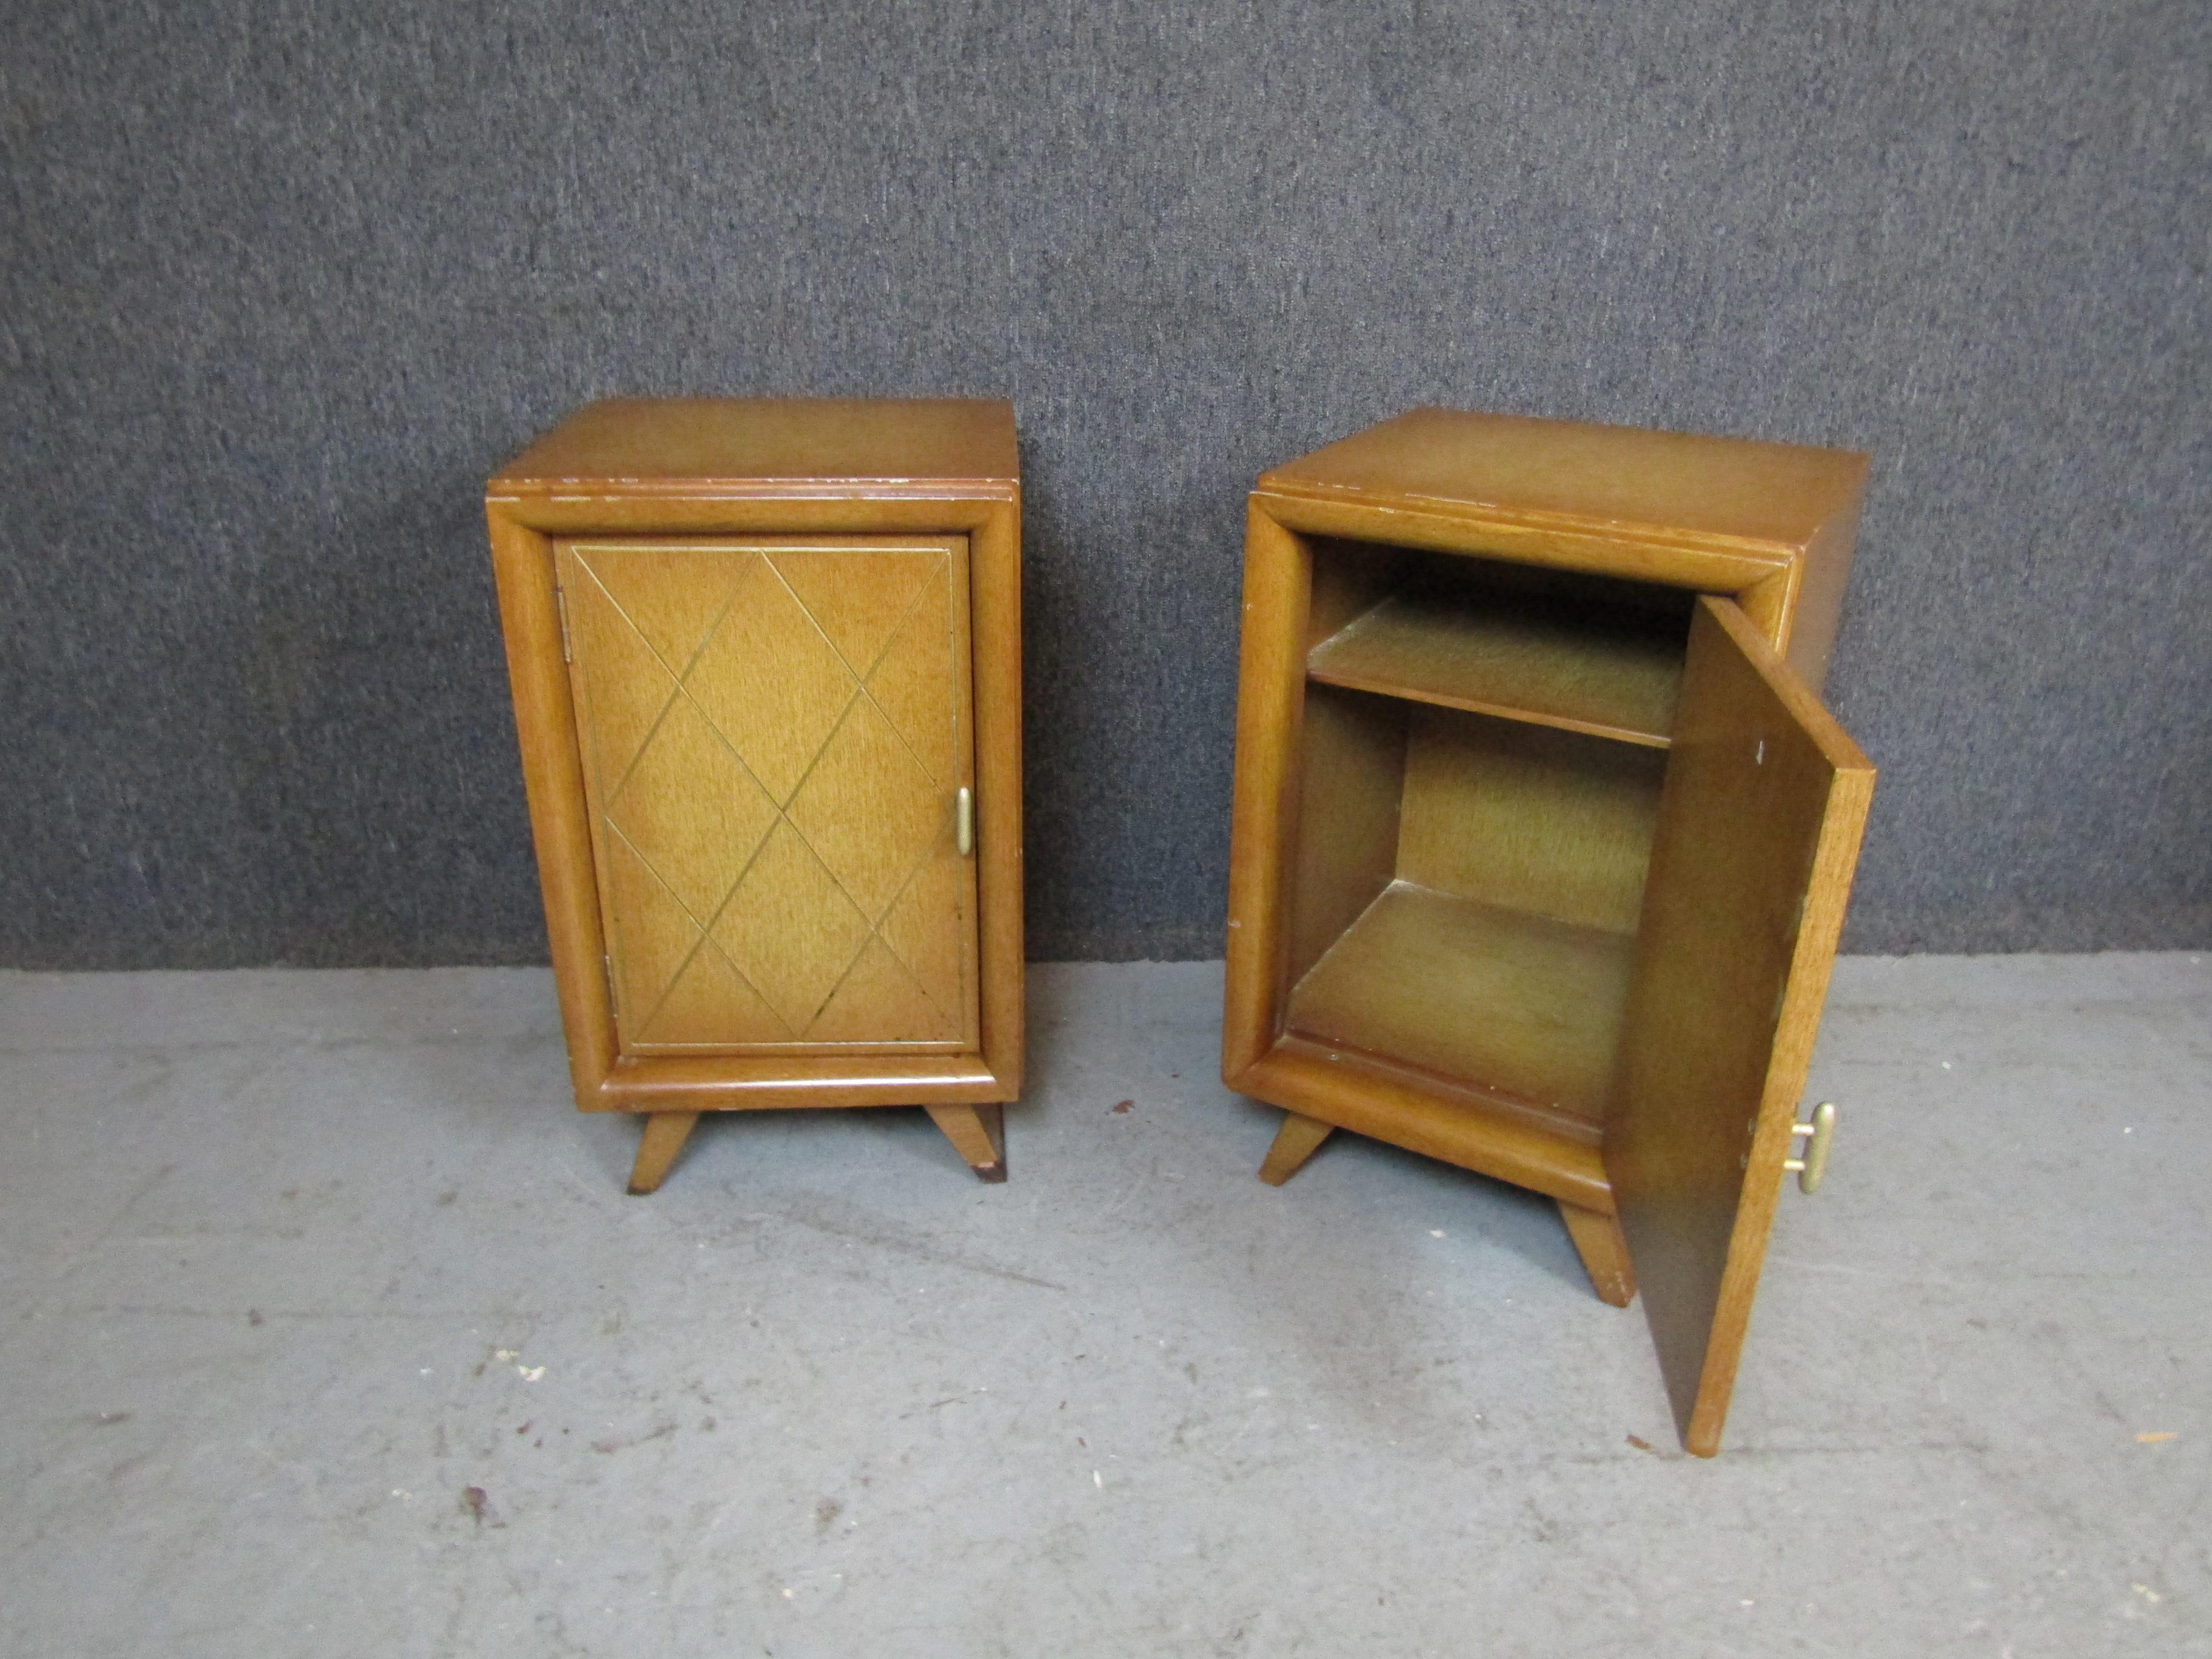 Post-War Art Deco Mahogany Nightstands In Good Condition For Sale In Brooklyn, NY